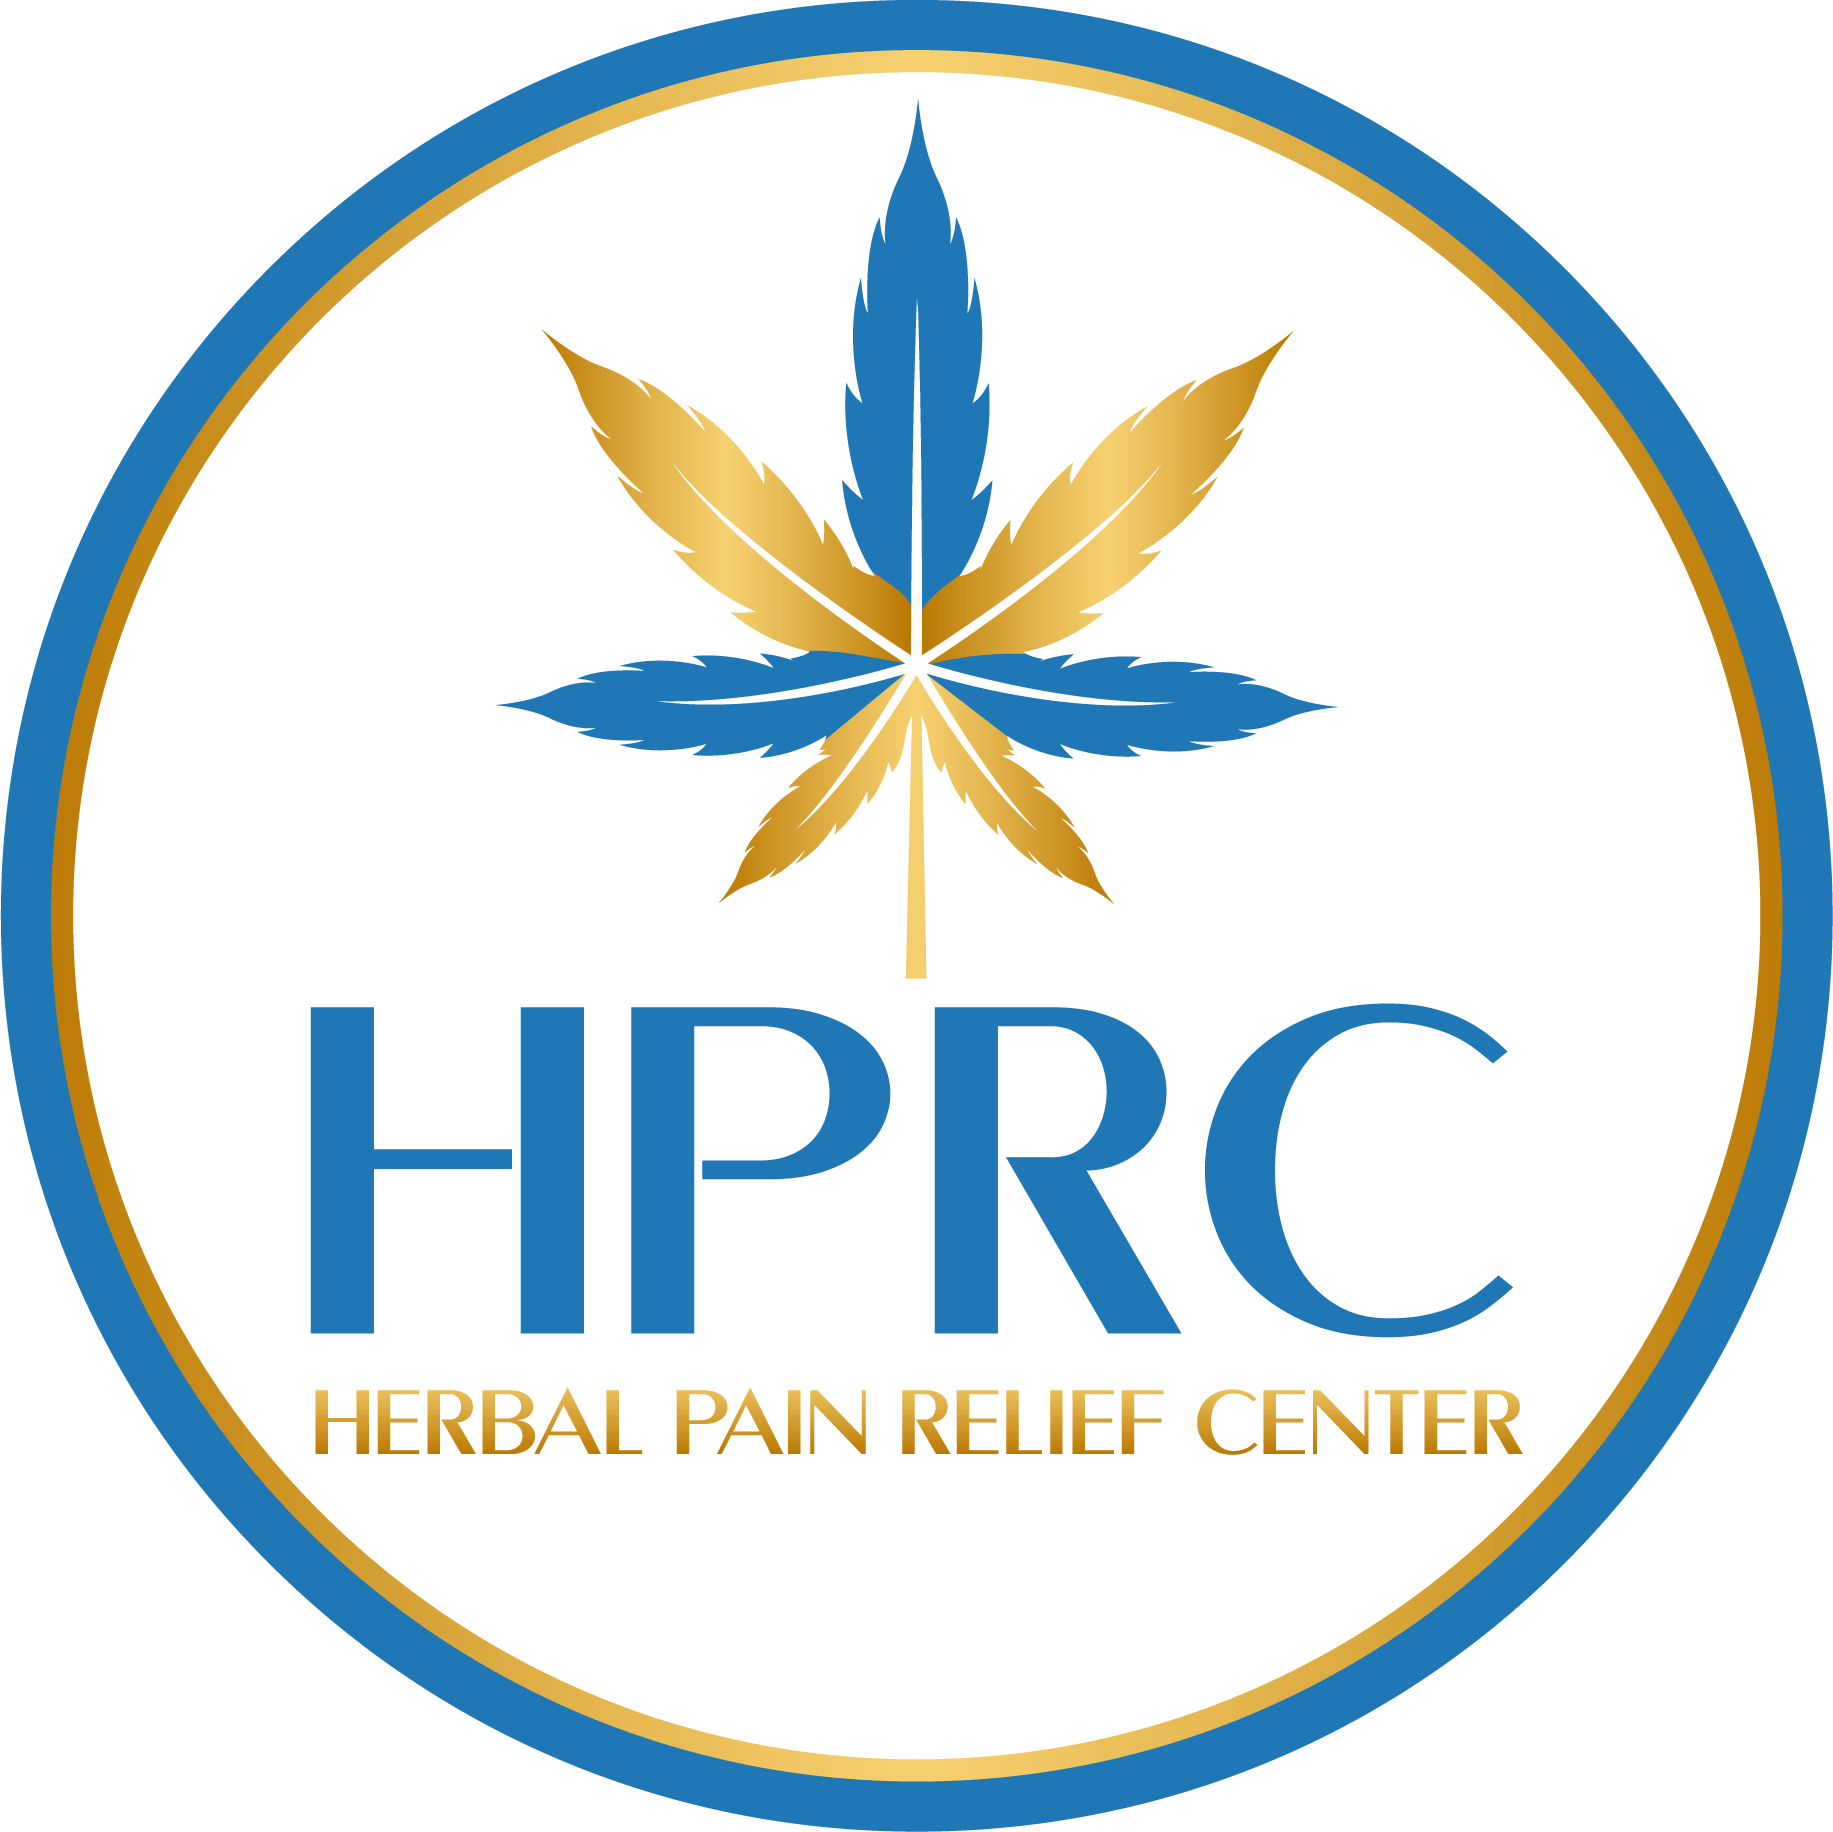 Herbal Pain Relief Center logo